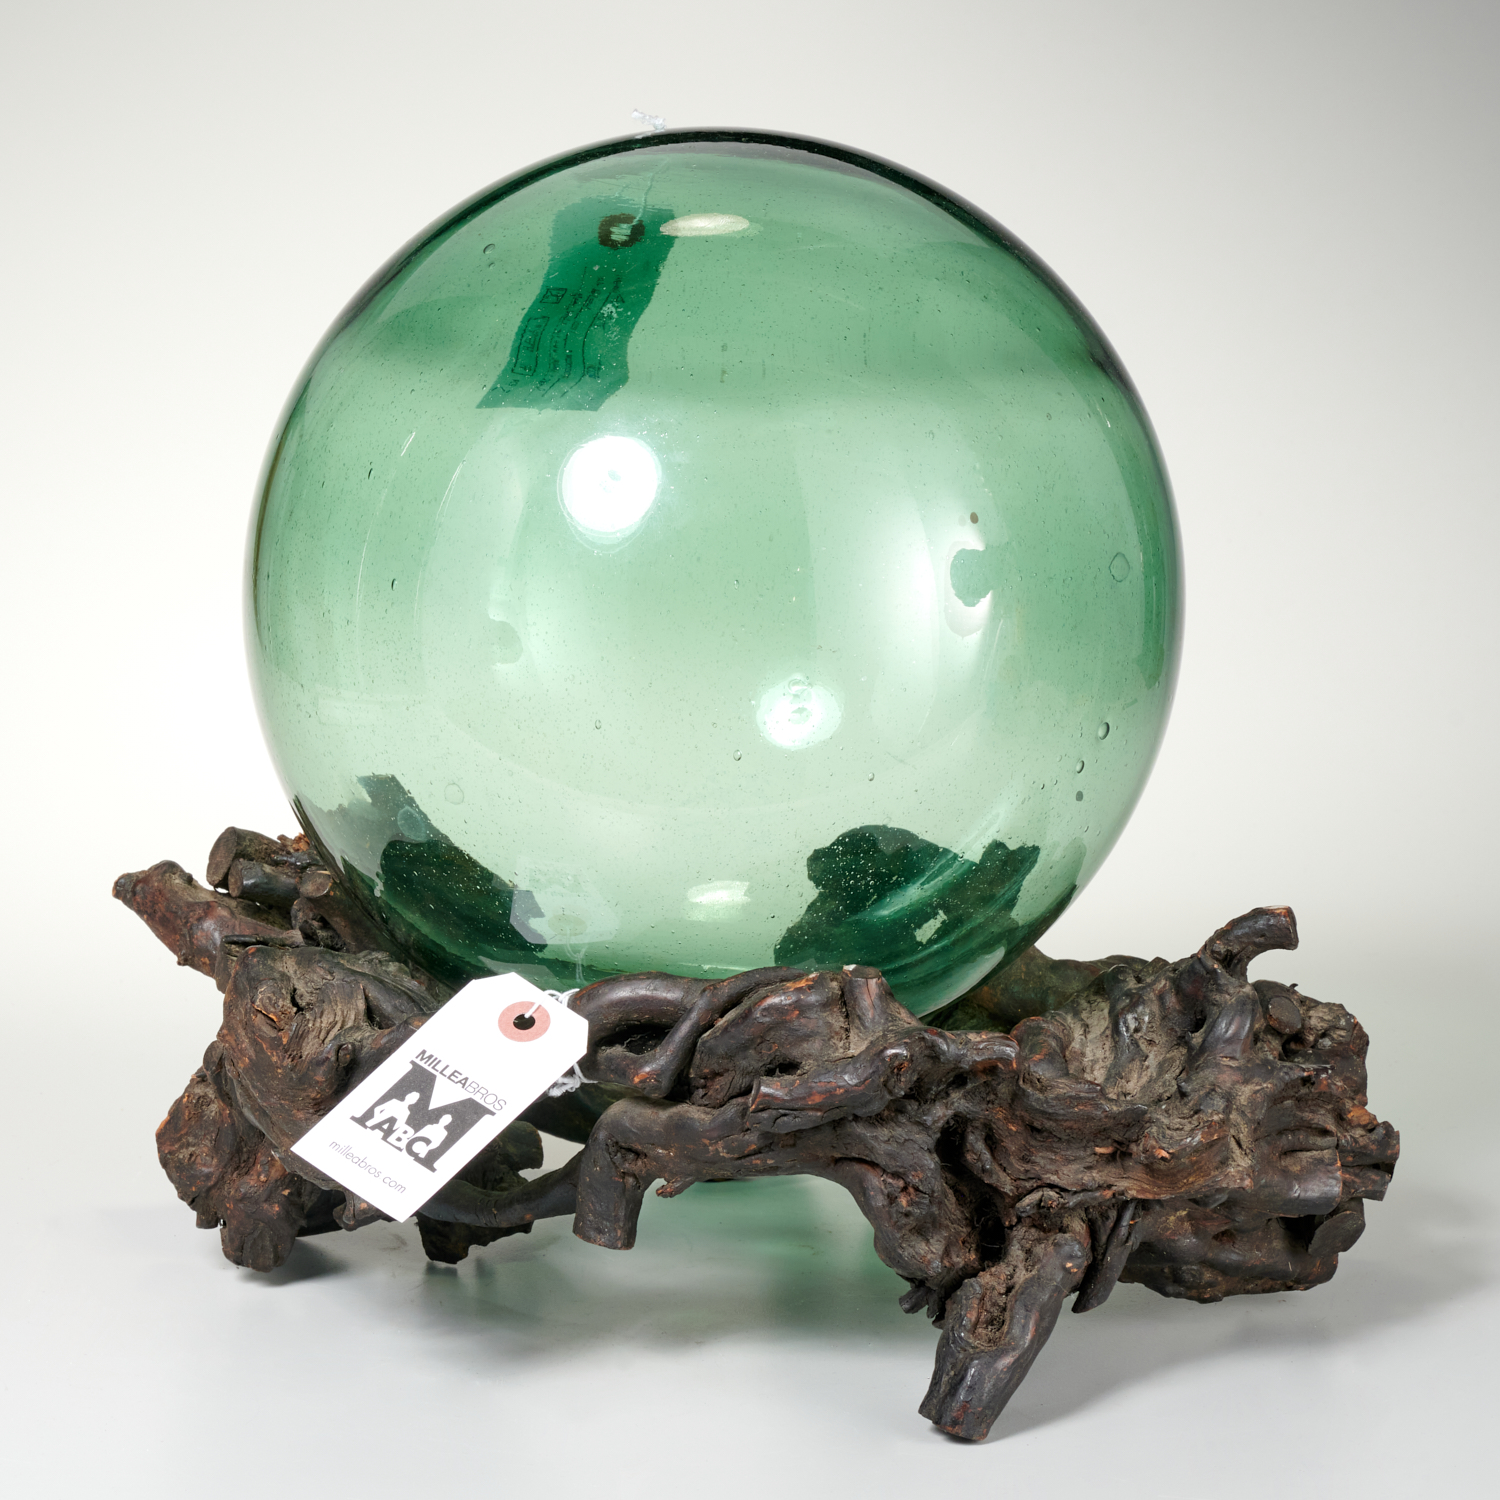 GREEN GLASS WITCH BALL ON TREE-ROOT